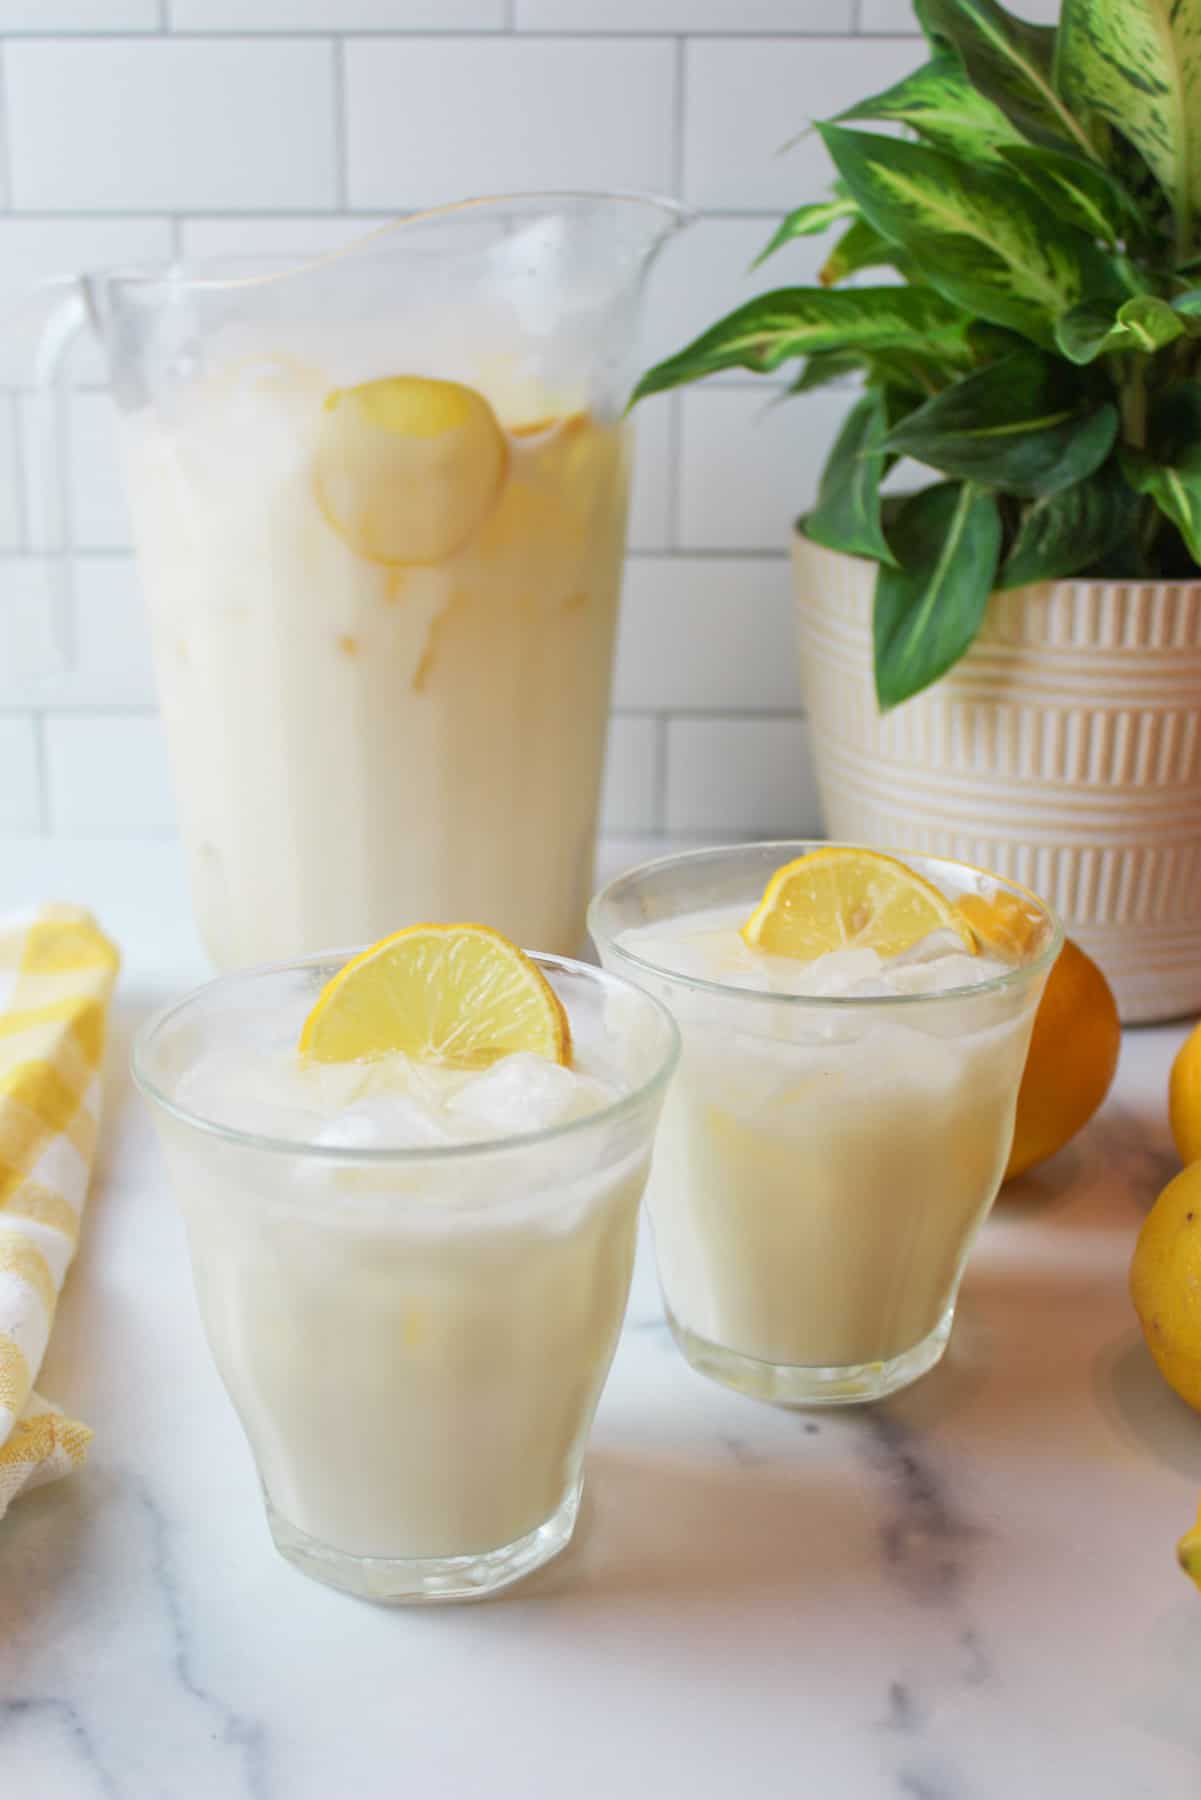 two glasses of creamy lemonade garnished with a slice of lemon and a pitcher of lemonade in the background.